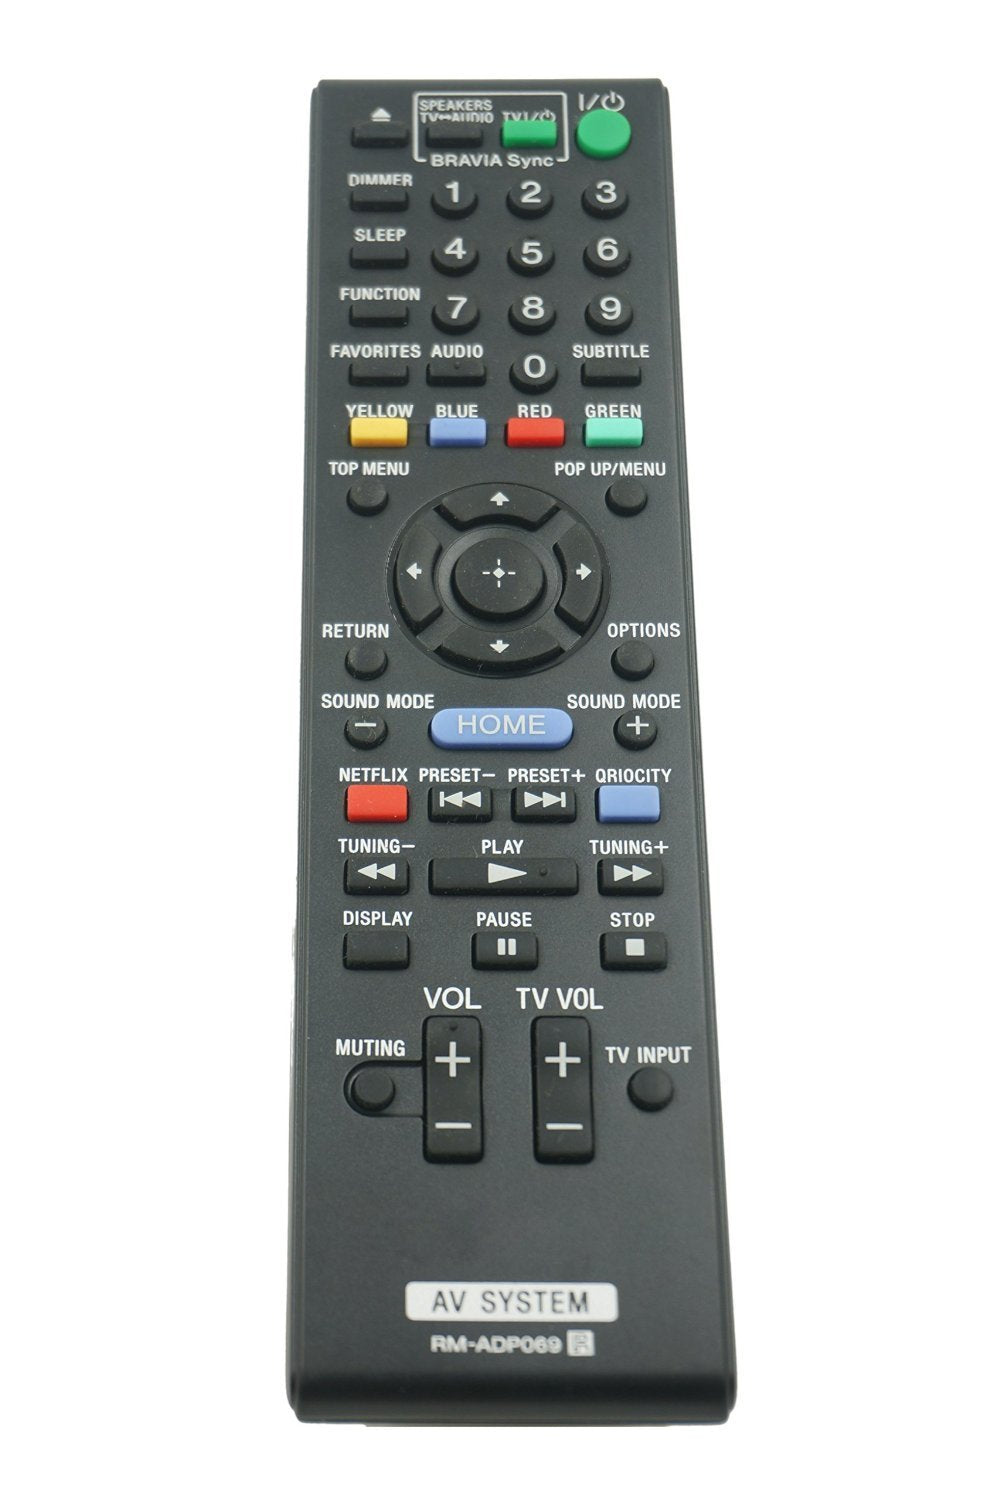 RM-ADP069 Replacement Remote Control for Sony AV System BDV-N790W BDV-T57 BDV-E580 BDV-T58 HBD-T79 HBD-E3100 HBD-E280